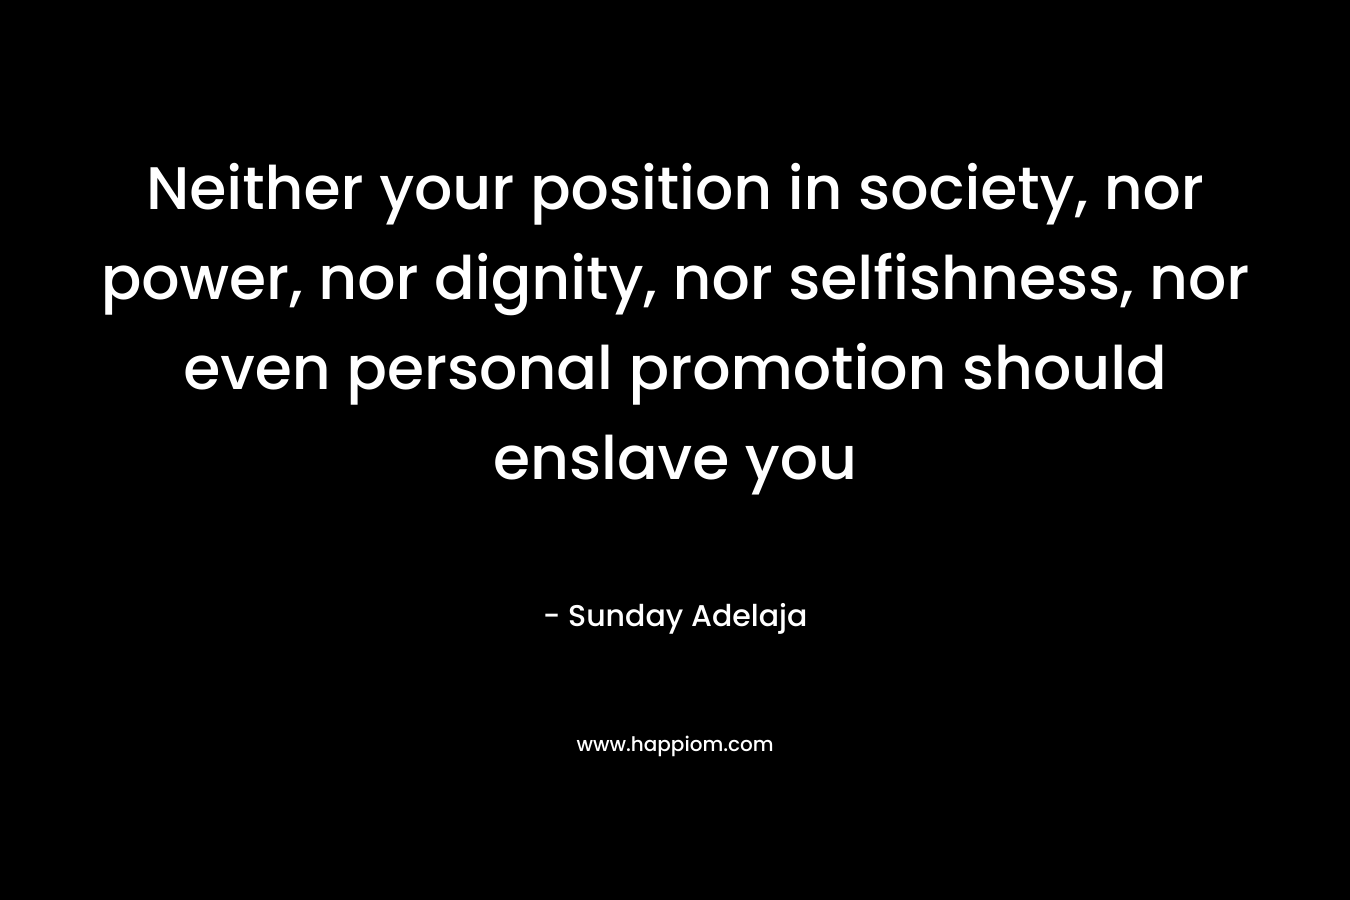 Neither your position in society, nor power, nor dignity, nor selfishness, nor even personal promotion should enslave you – Sunday Adelaja